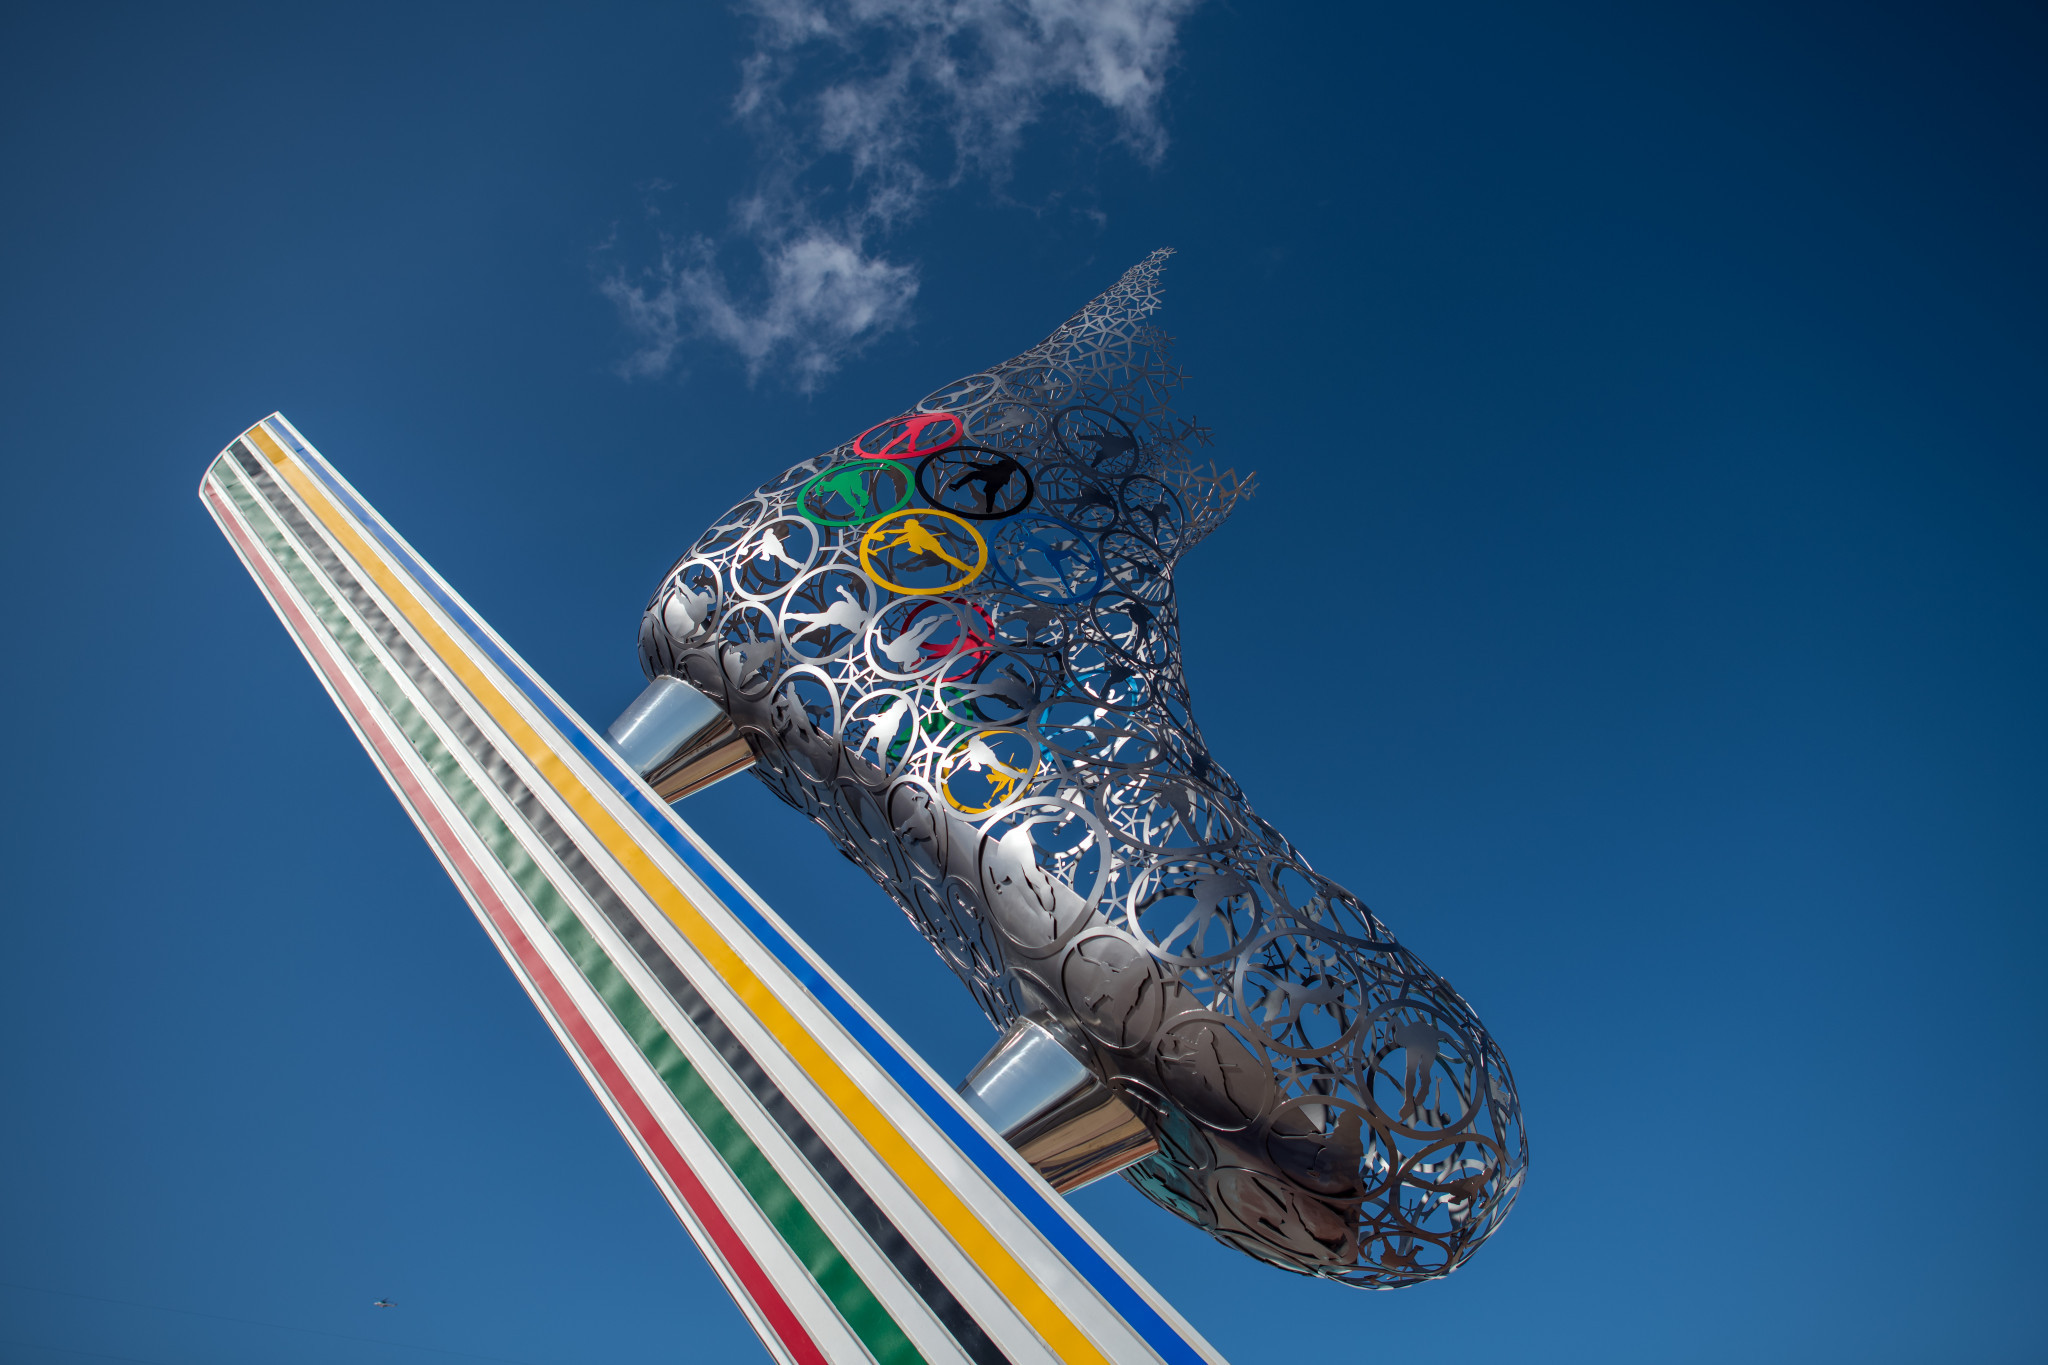 A grand ice skate sculpture glistens in the sun in the Gangneung Coastal Cluster ©Getty Images